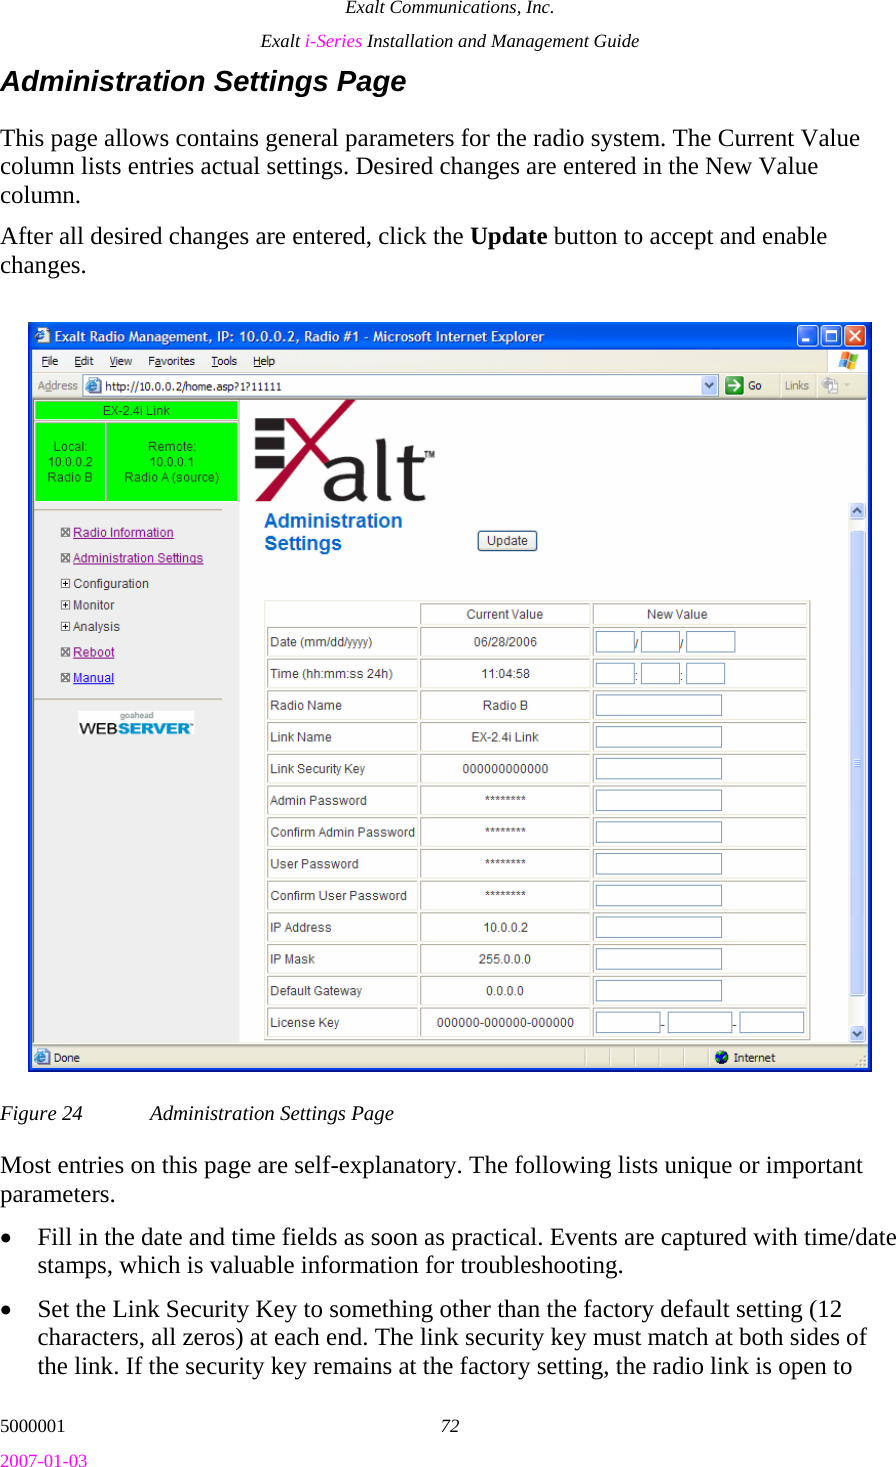 Exalt Communications, Inc. Exalt i-Series Installation and Management Guide 5000001  72 2007-01-03 Administration Settings Page This page allows contains general parameters for the radio system. The Current Value column lists entries actual settings. Desired changes are entered in the New Value column. After all desired changes are entered, click the Update button to accept and enable changes.  Figure 24  Administration Settings Page Most entries on this page are self-explanatory. The following lists unique or important parameters. • Fill in the date and time fields as soon as practical. Events are captured with time/date stamps, which is valuable information for troubleshooting. • Set the Link Security Key to something other than the factory default setting (12 characters, all zeros) at each end. The link security key must match at both sides of the link. If the security key remains at the factory setting, the radio link is open to 